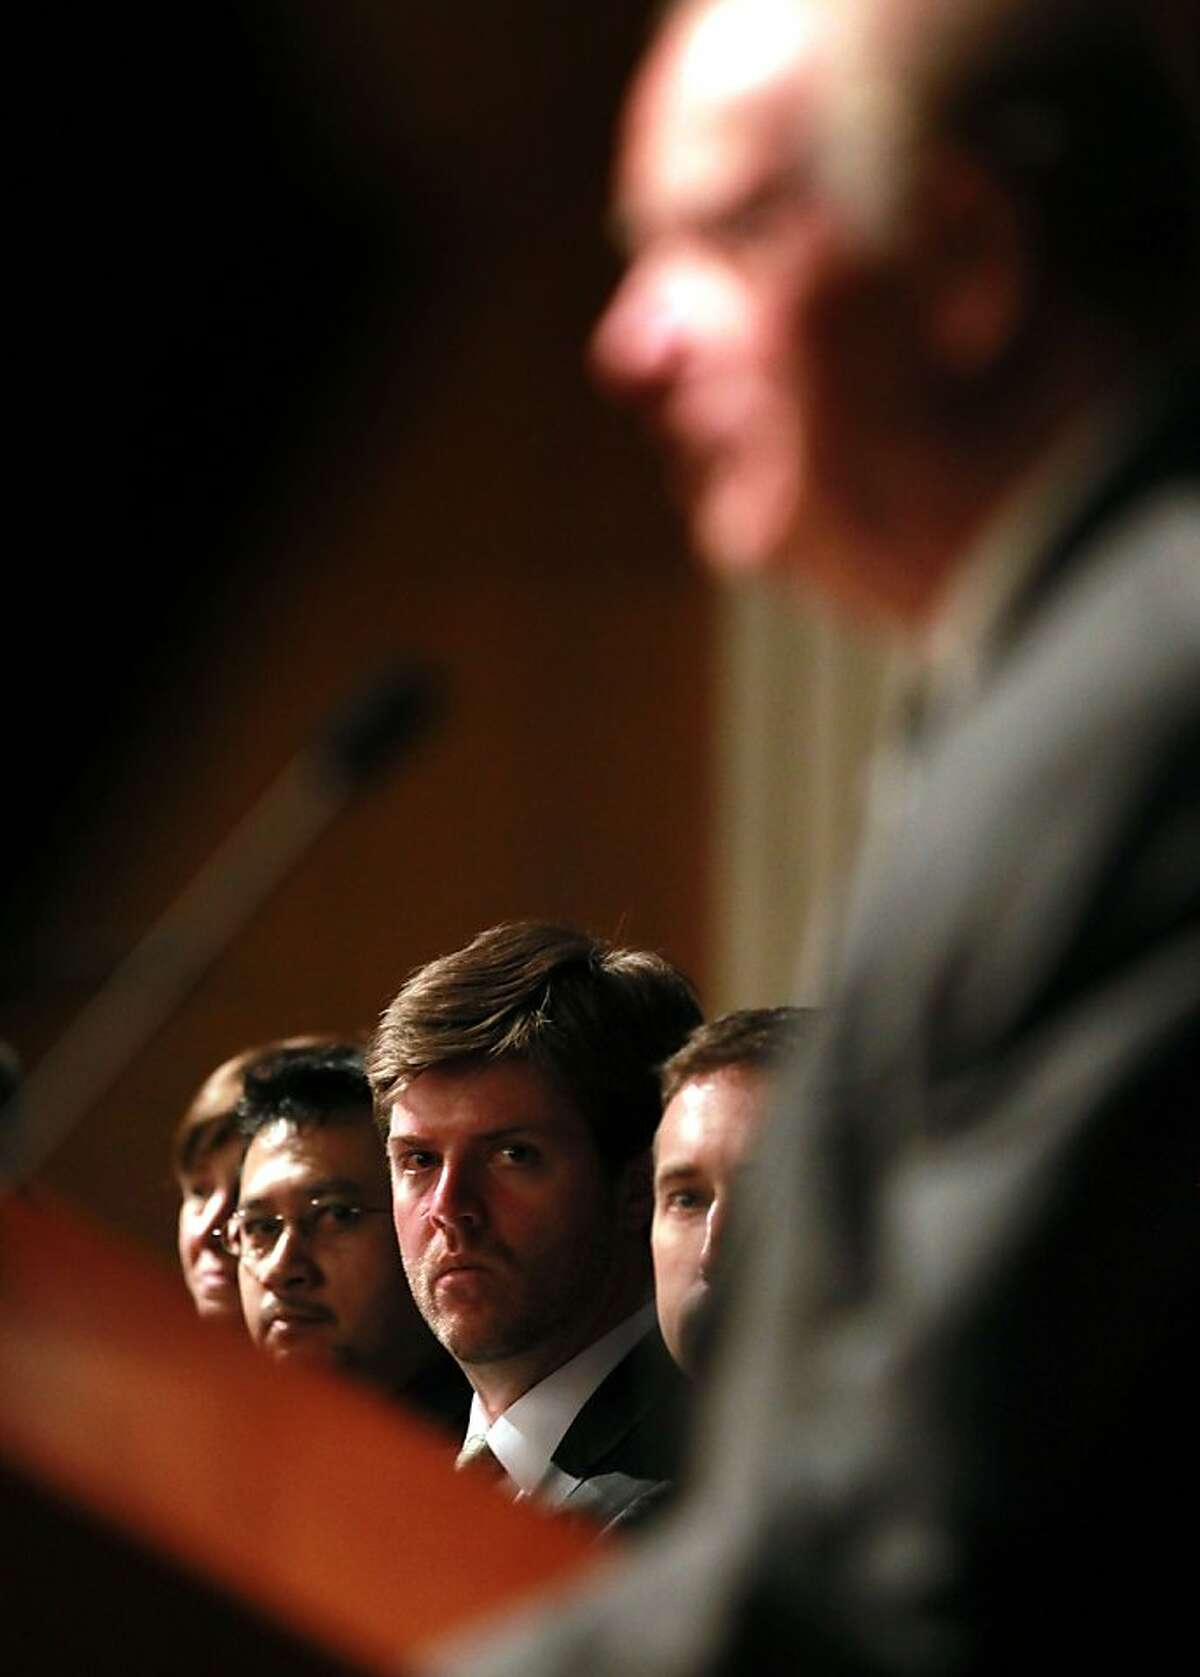 UC Davis task force board members look on as Cruz Reynoso chairman of the board spoke to several hundred students and community members after the University of California released the long-awaited report on the pepper spraying of students during an Occupy UC Davis demonstration Nov. 18, 2011. Photo taken Wednesday, April 11, 2012 at UC Davis.